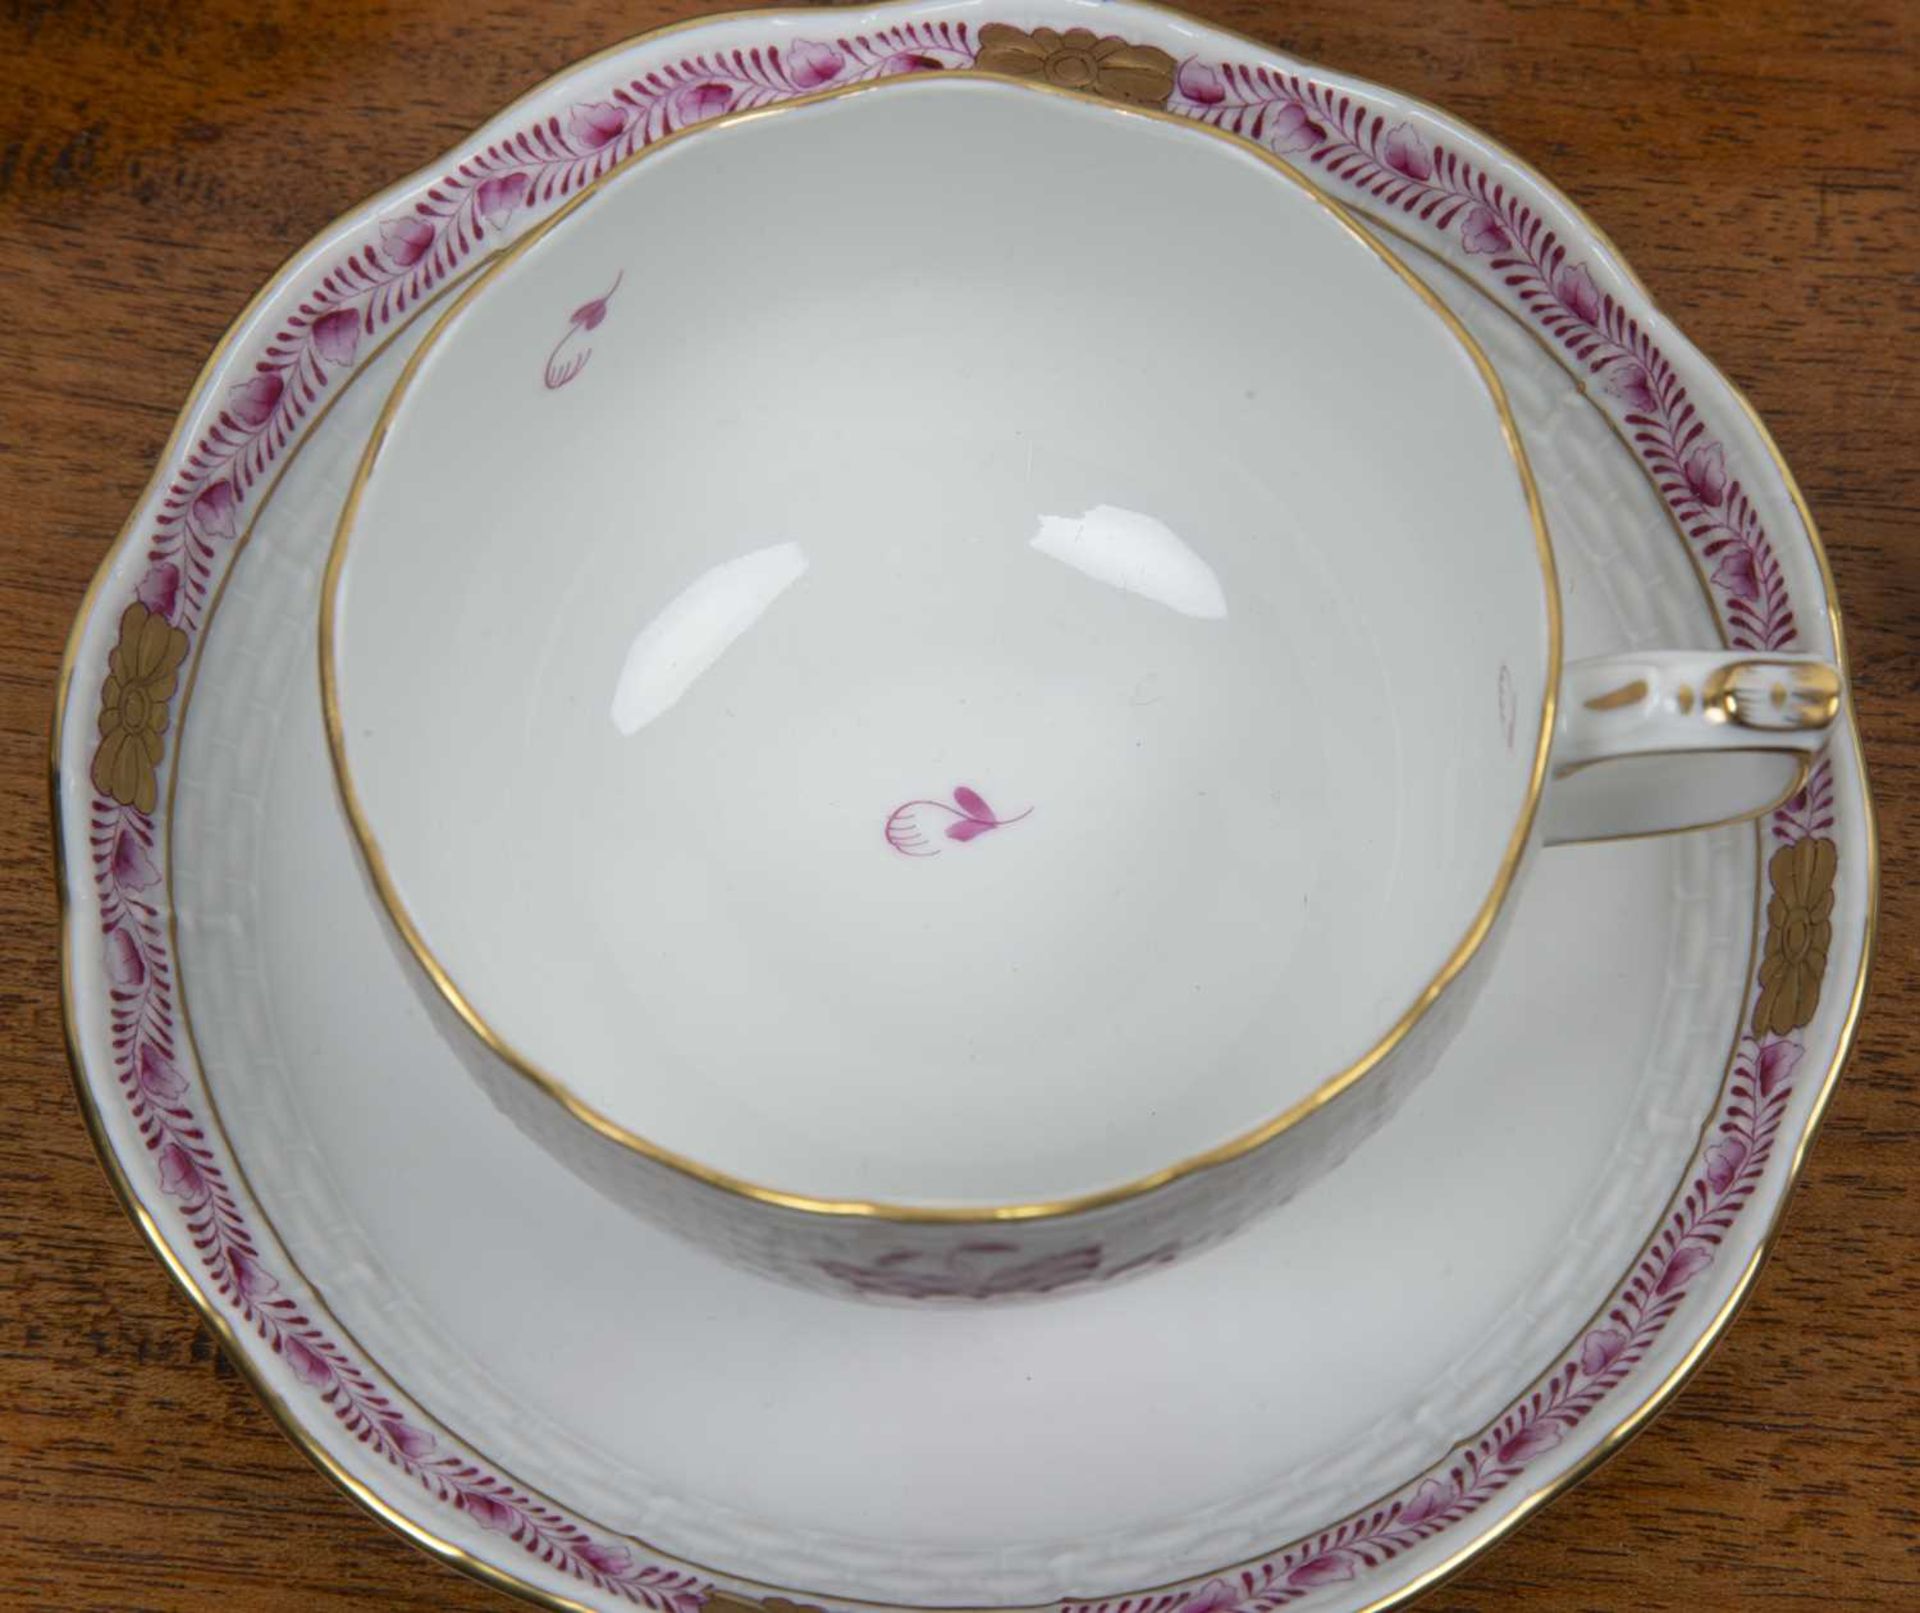 Herend porcelain coffee set 'Chinese Bouquet' pattern in the raspberry colourway, comprising of a - Image 4 of 5